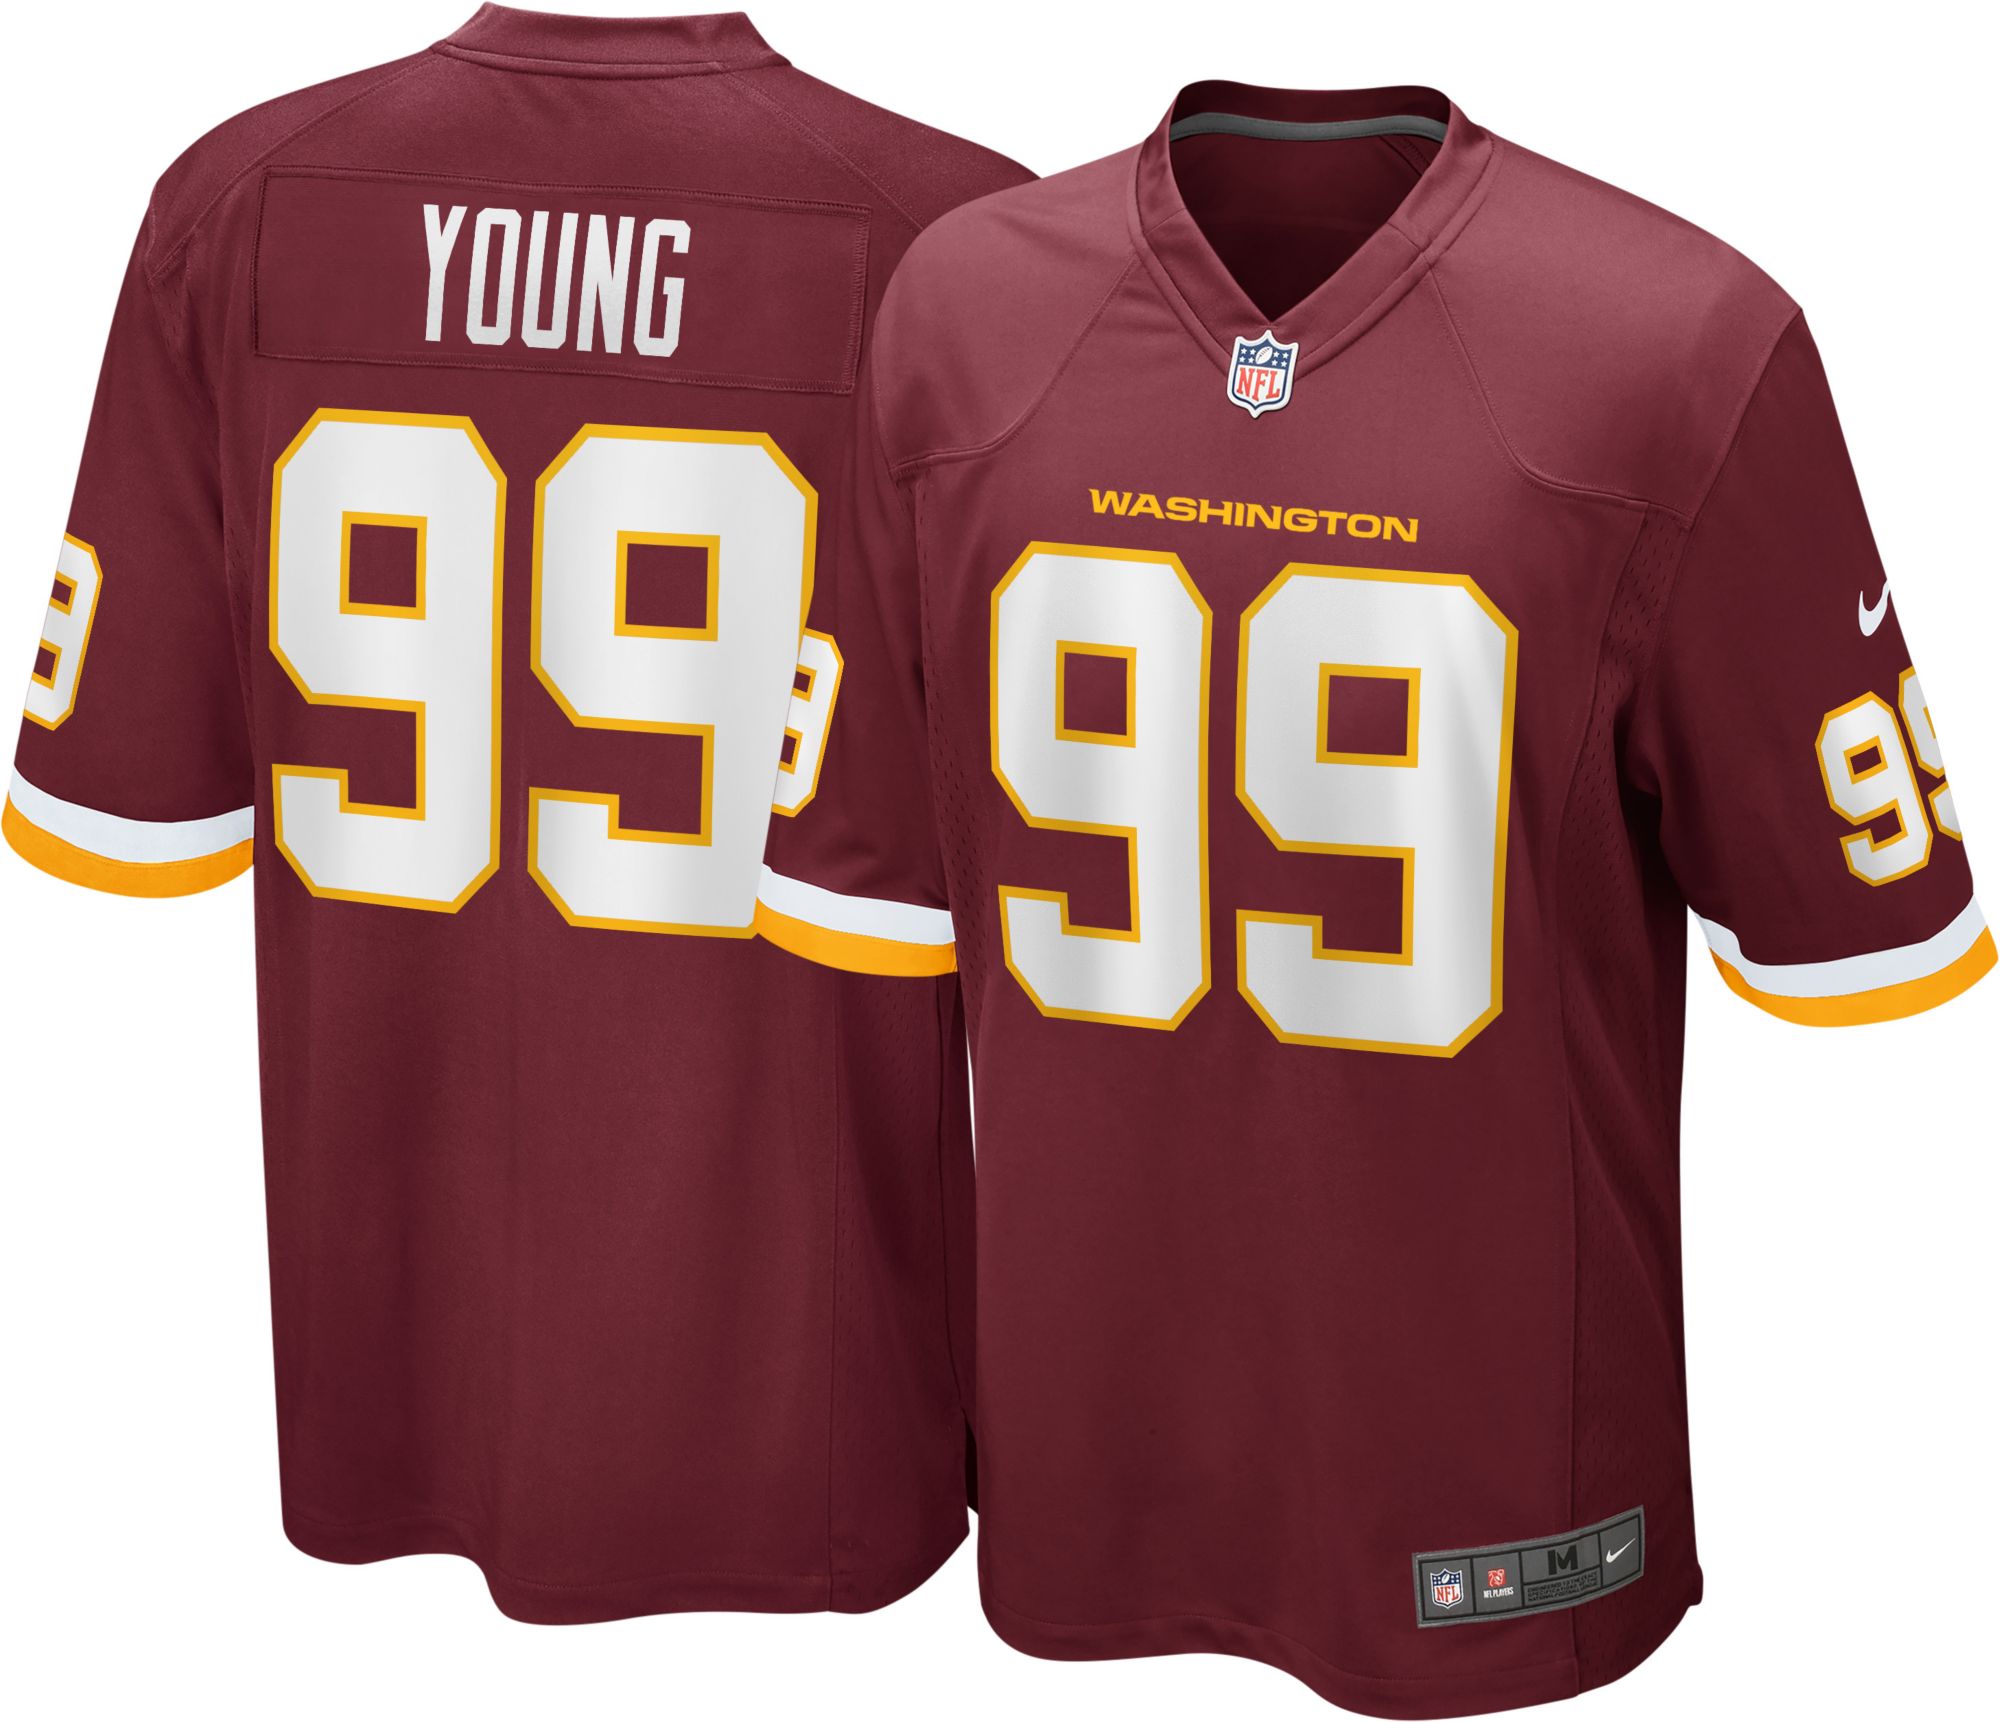 chase young nfl jersey